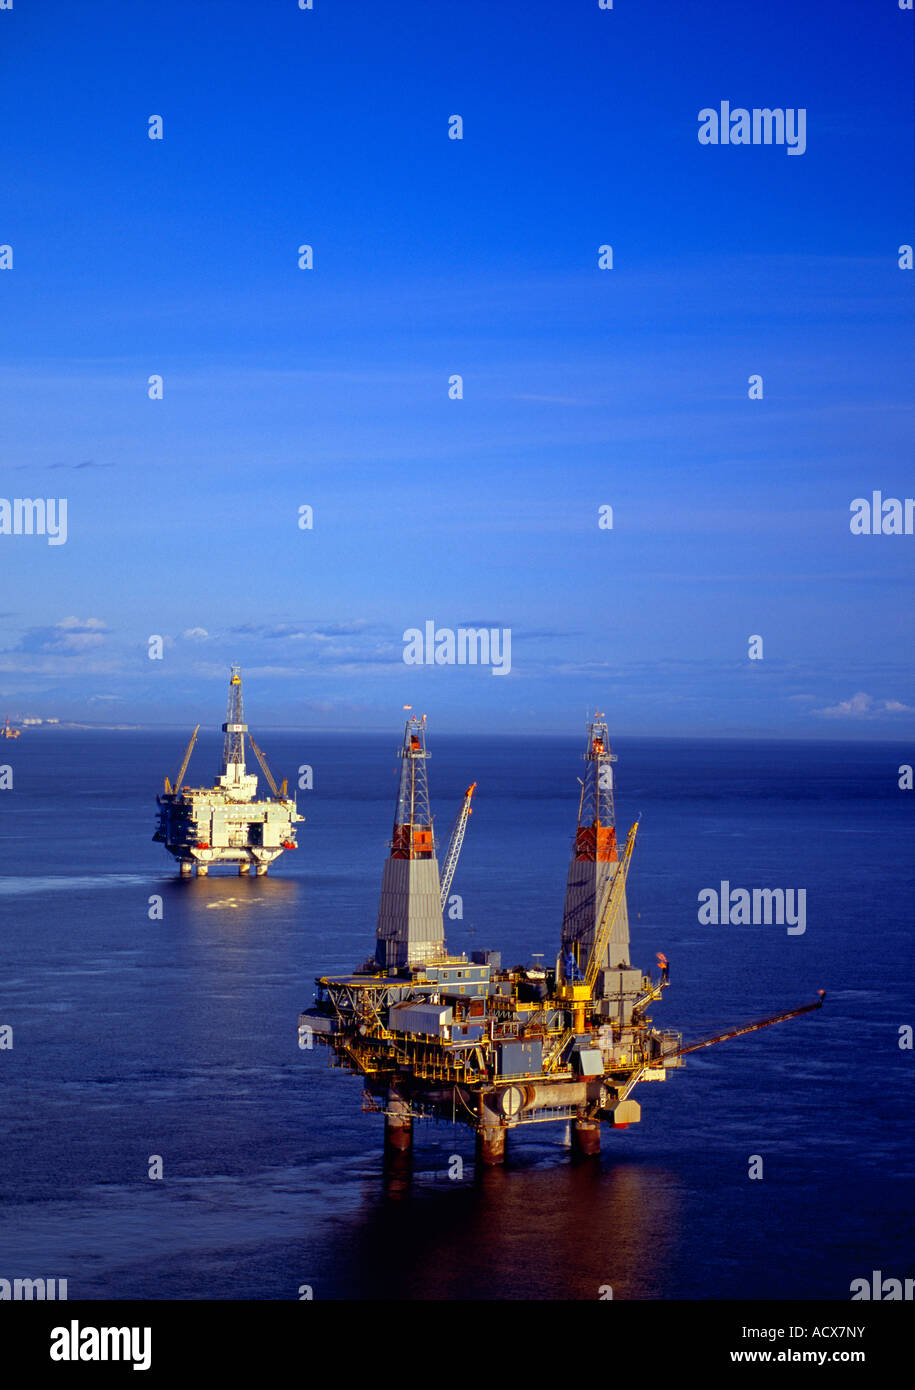 Grayling offshore platform producing oil and gas in the Cook Inlet Alaska Stock Photo